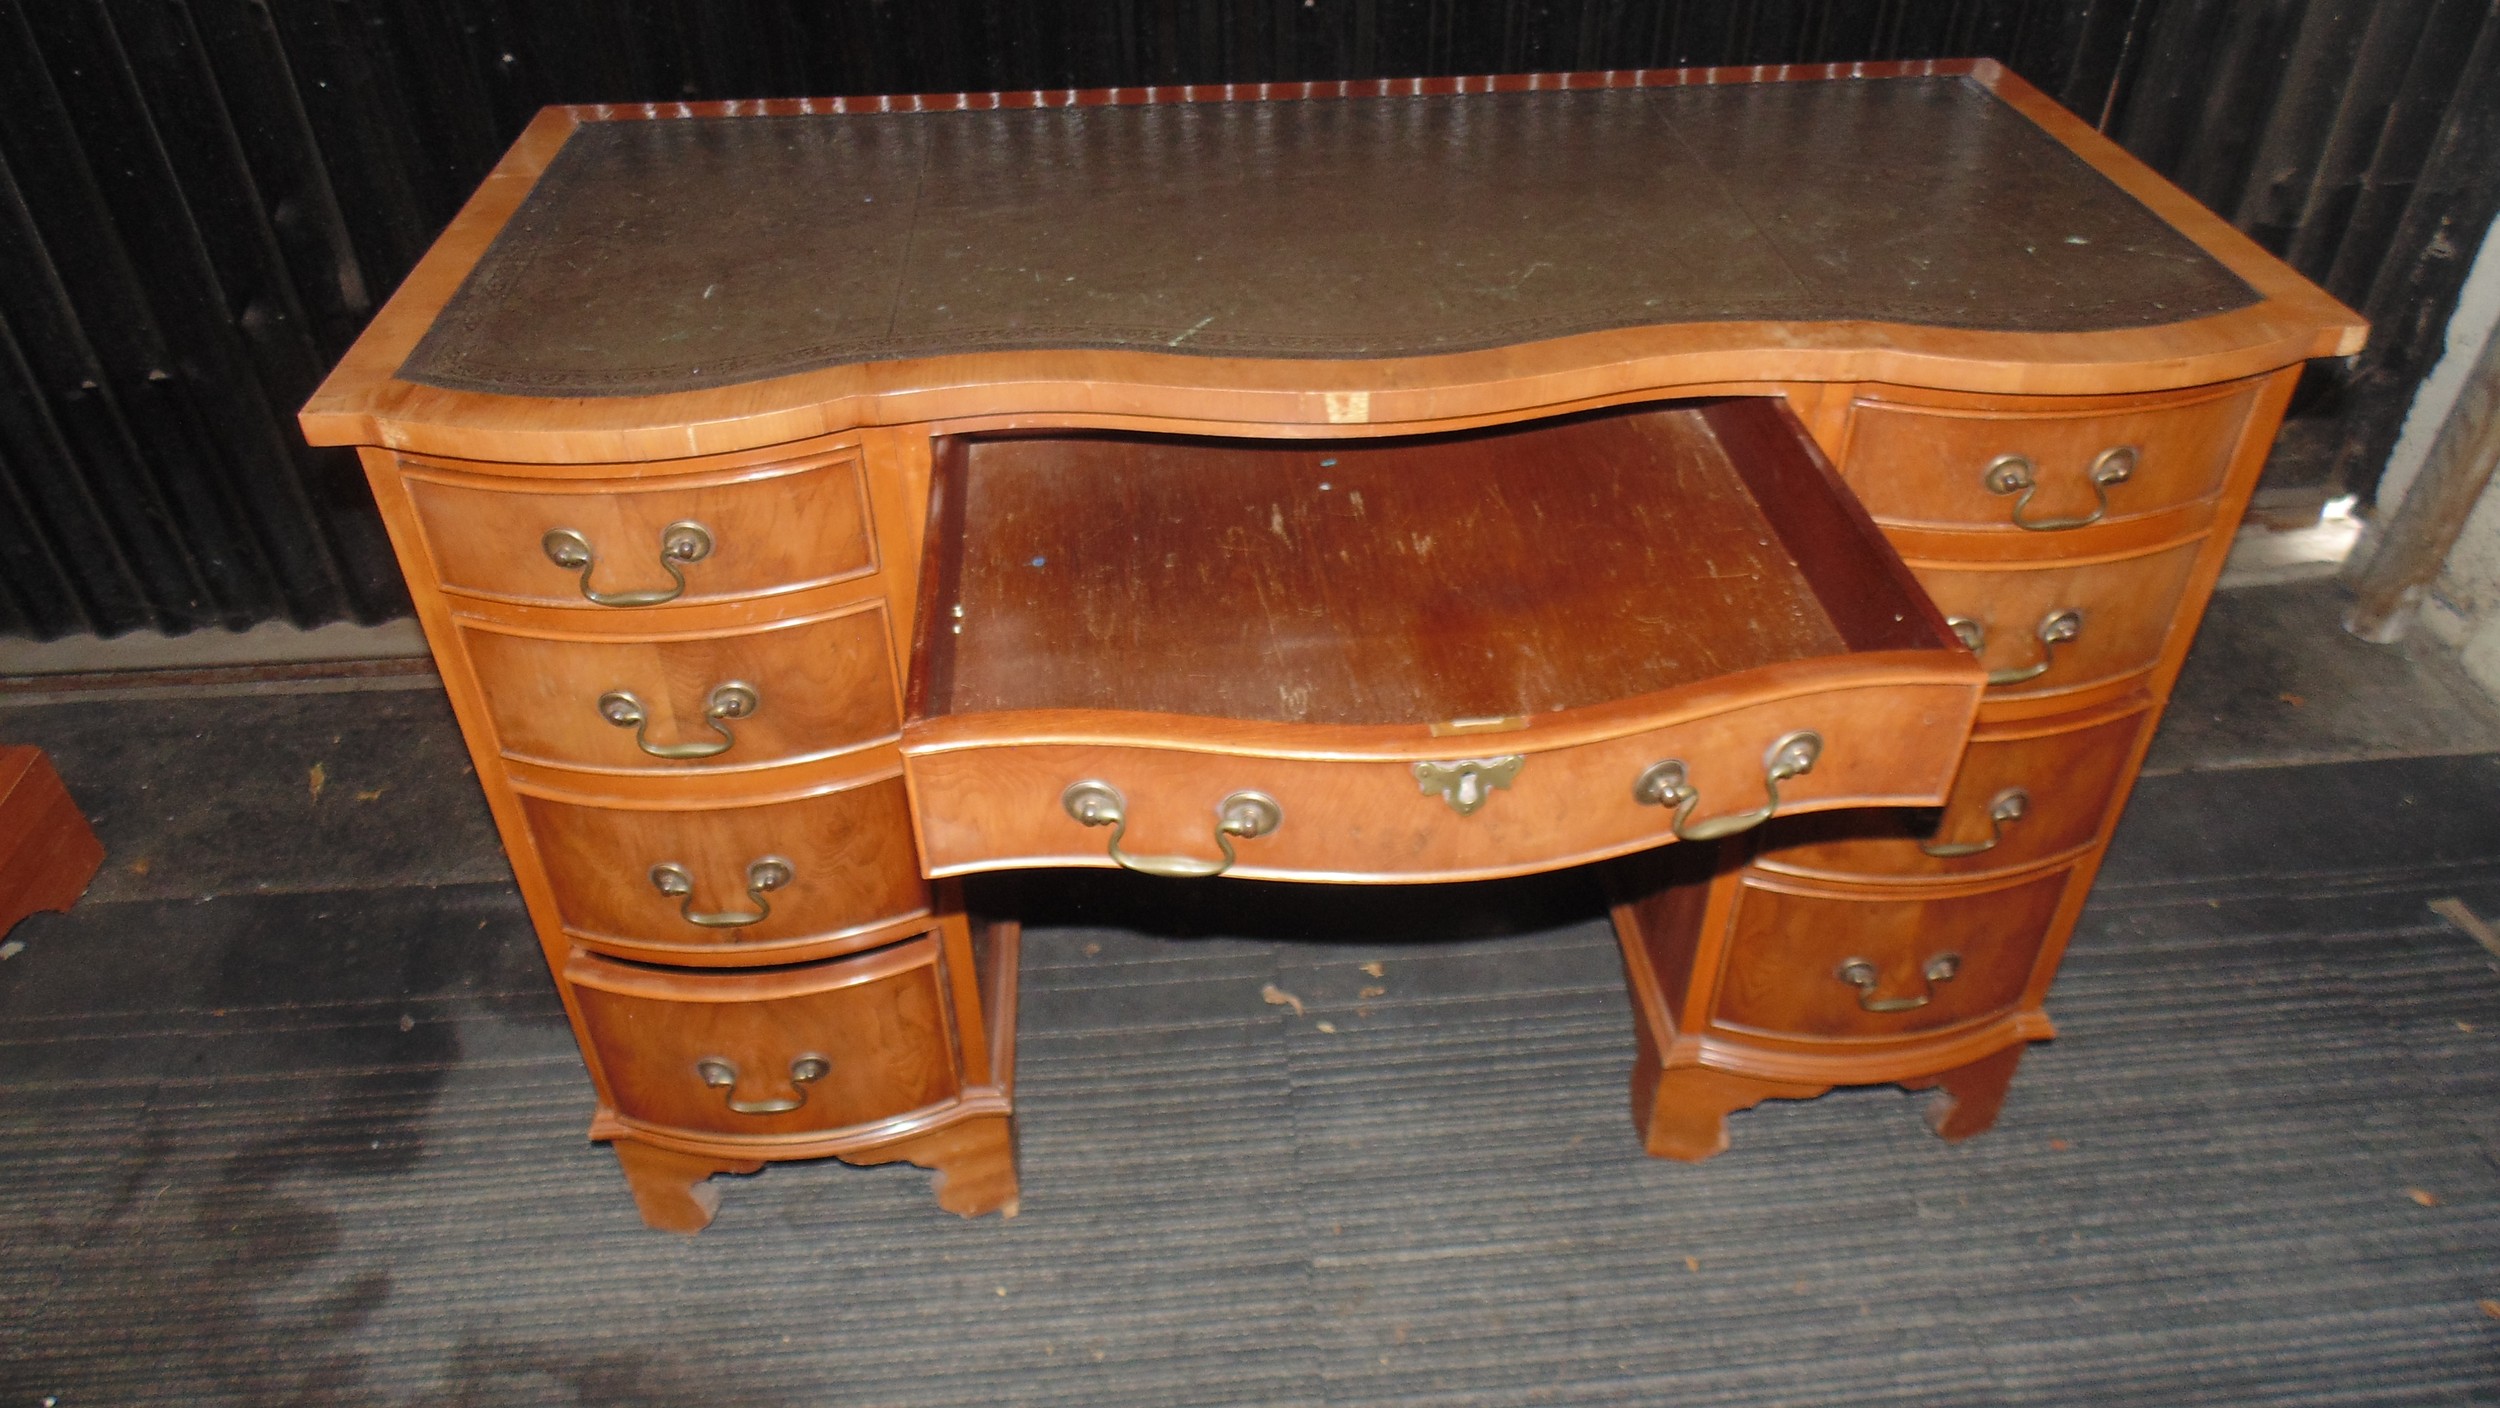 Reprodux Bevan Funnell Flamed Mahogany Serpentine front desk